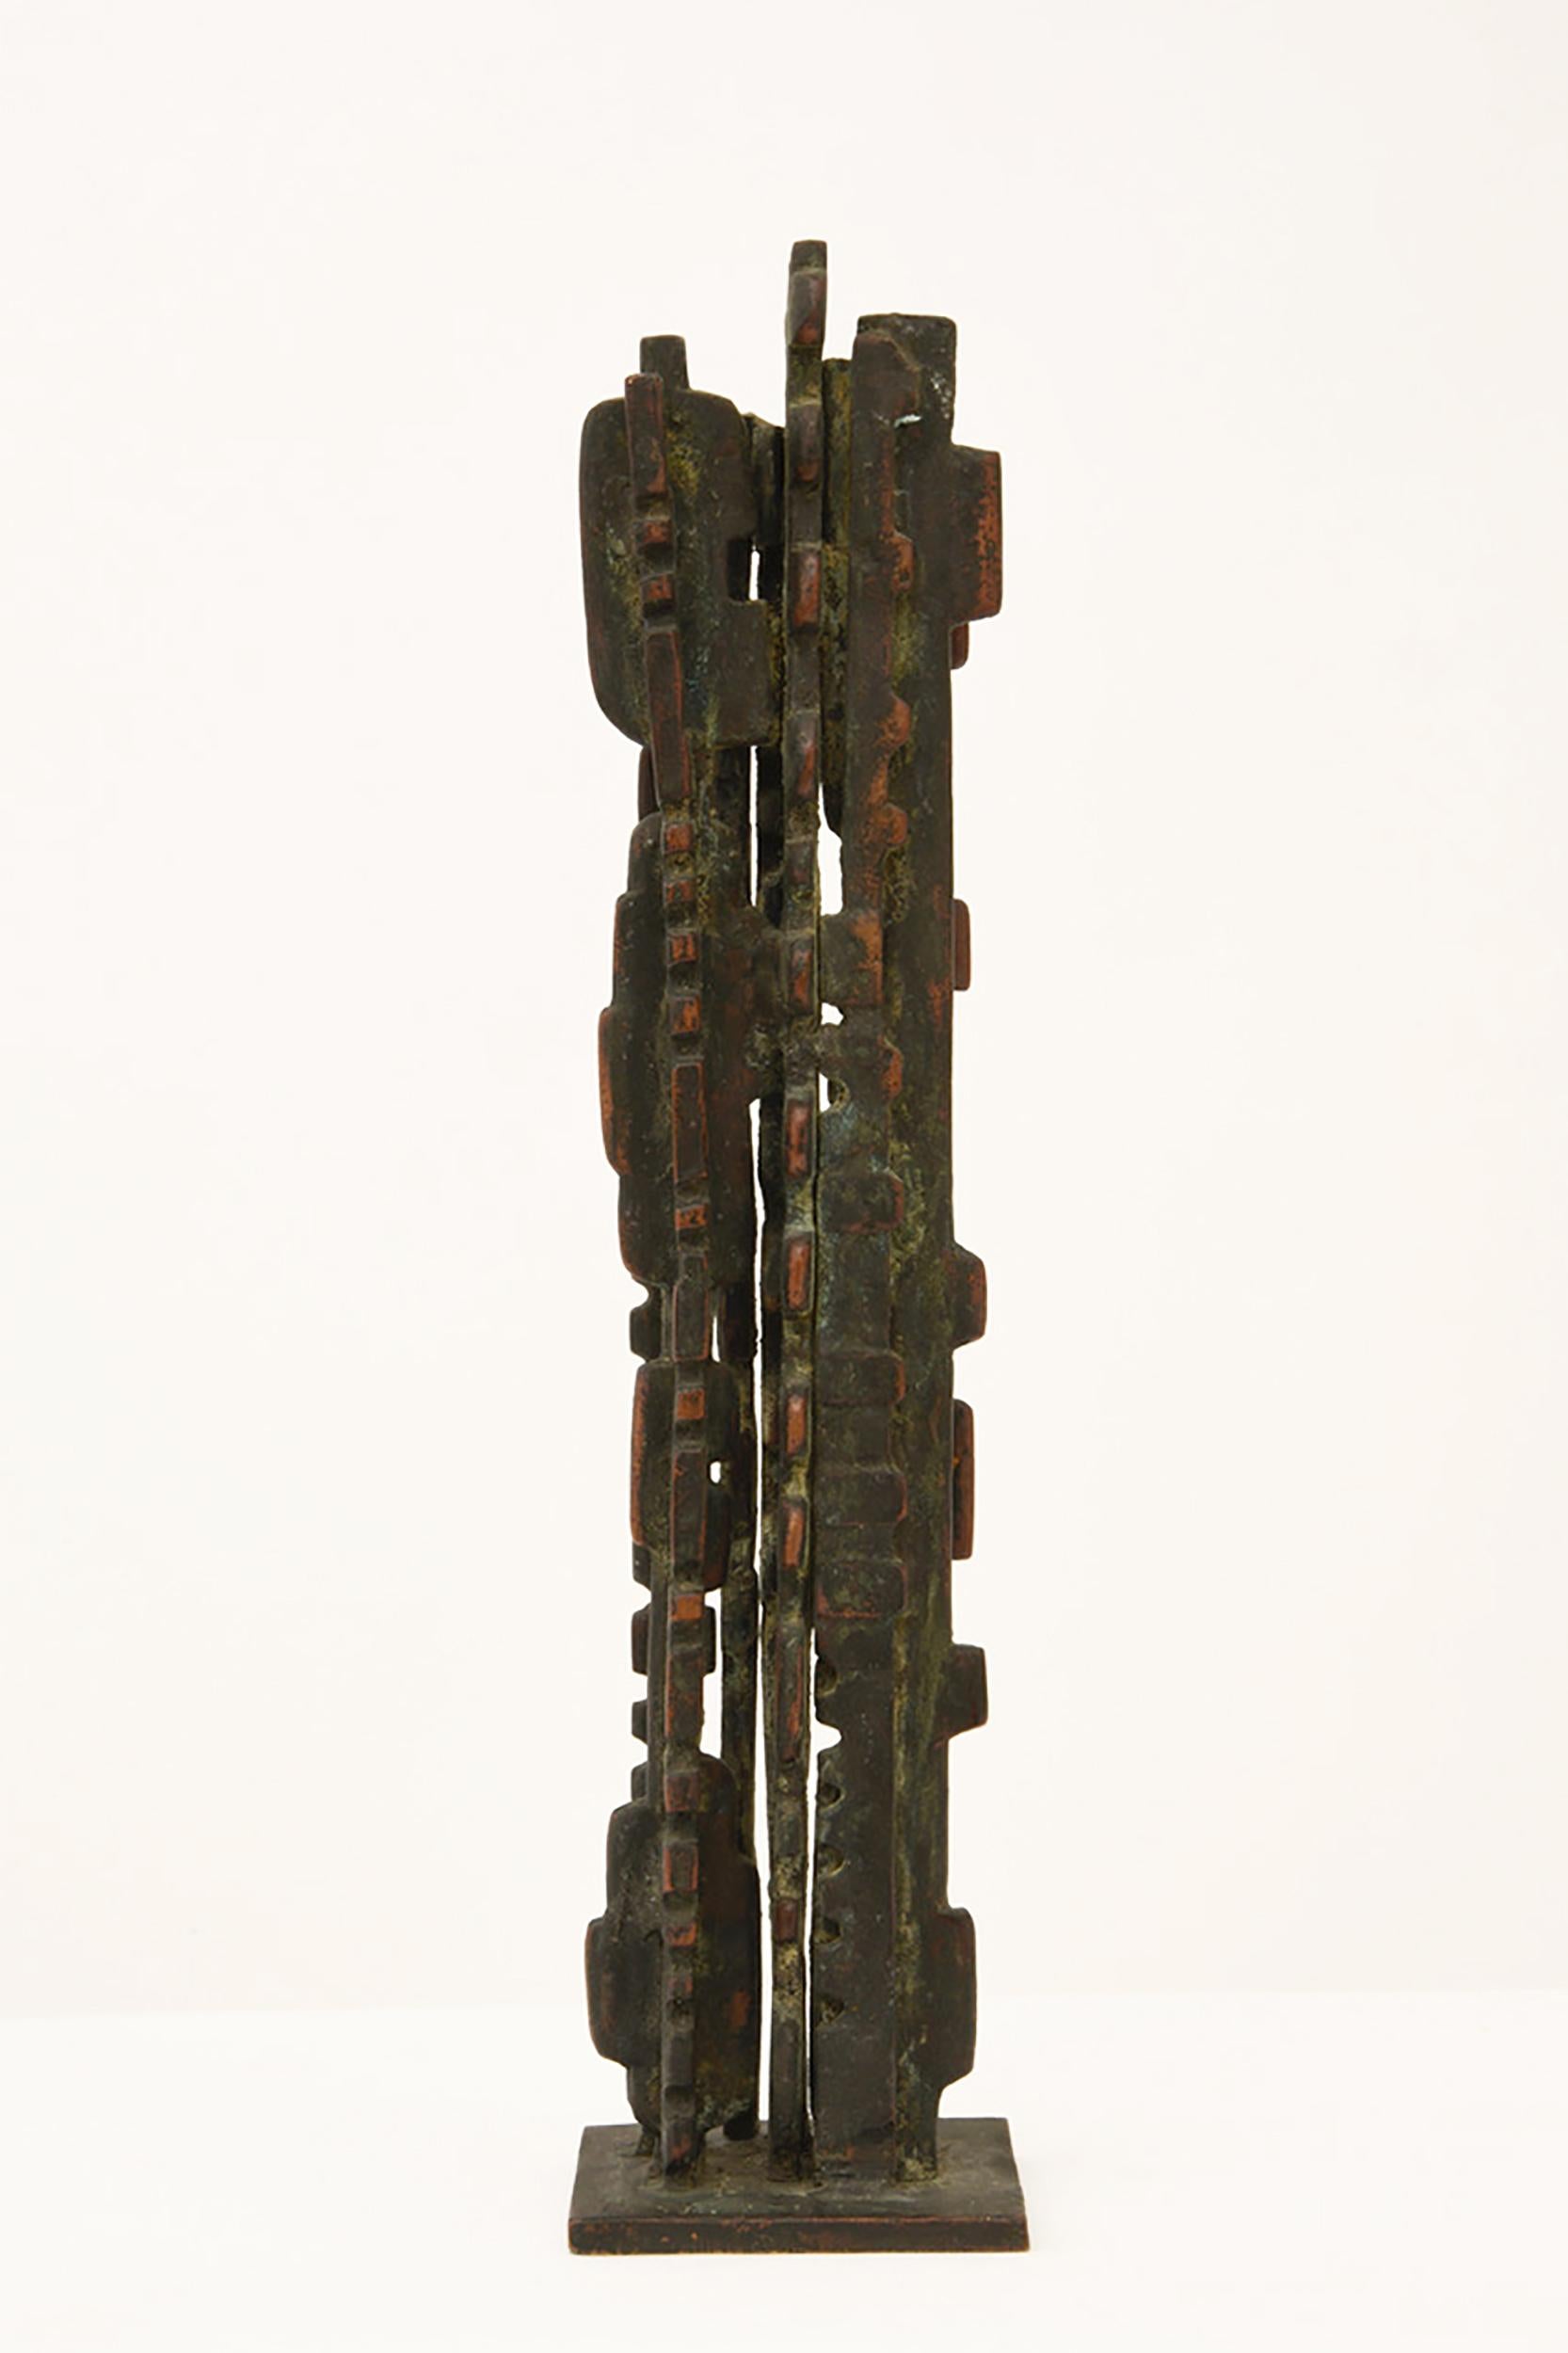 This bronze sculpture is by François Stahly made circa 1960. This piece is a small model of the larger 